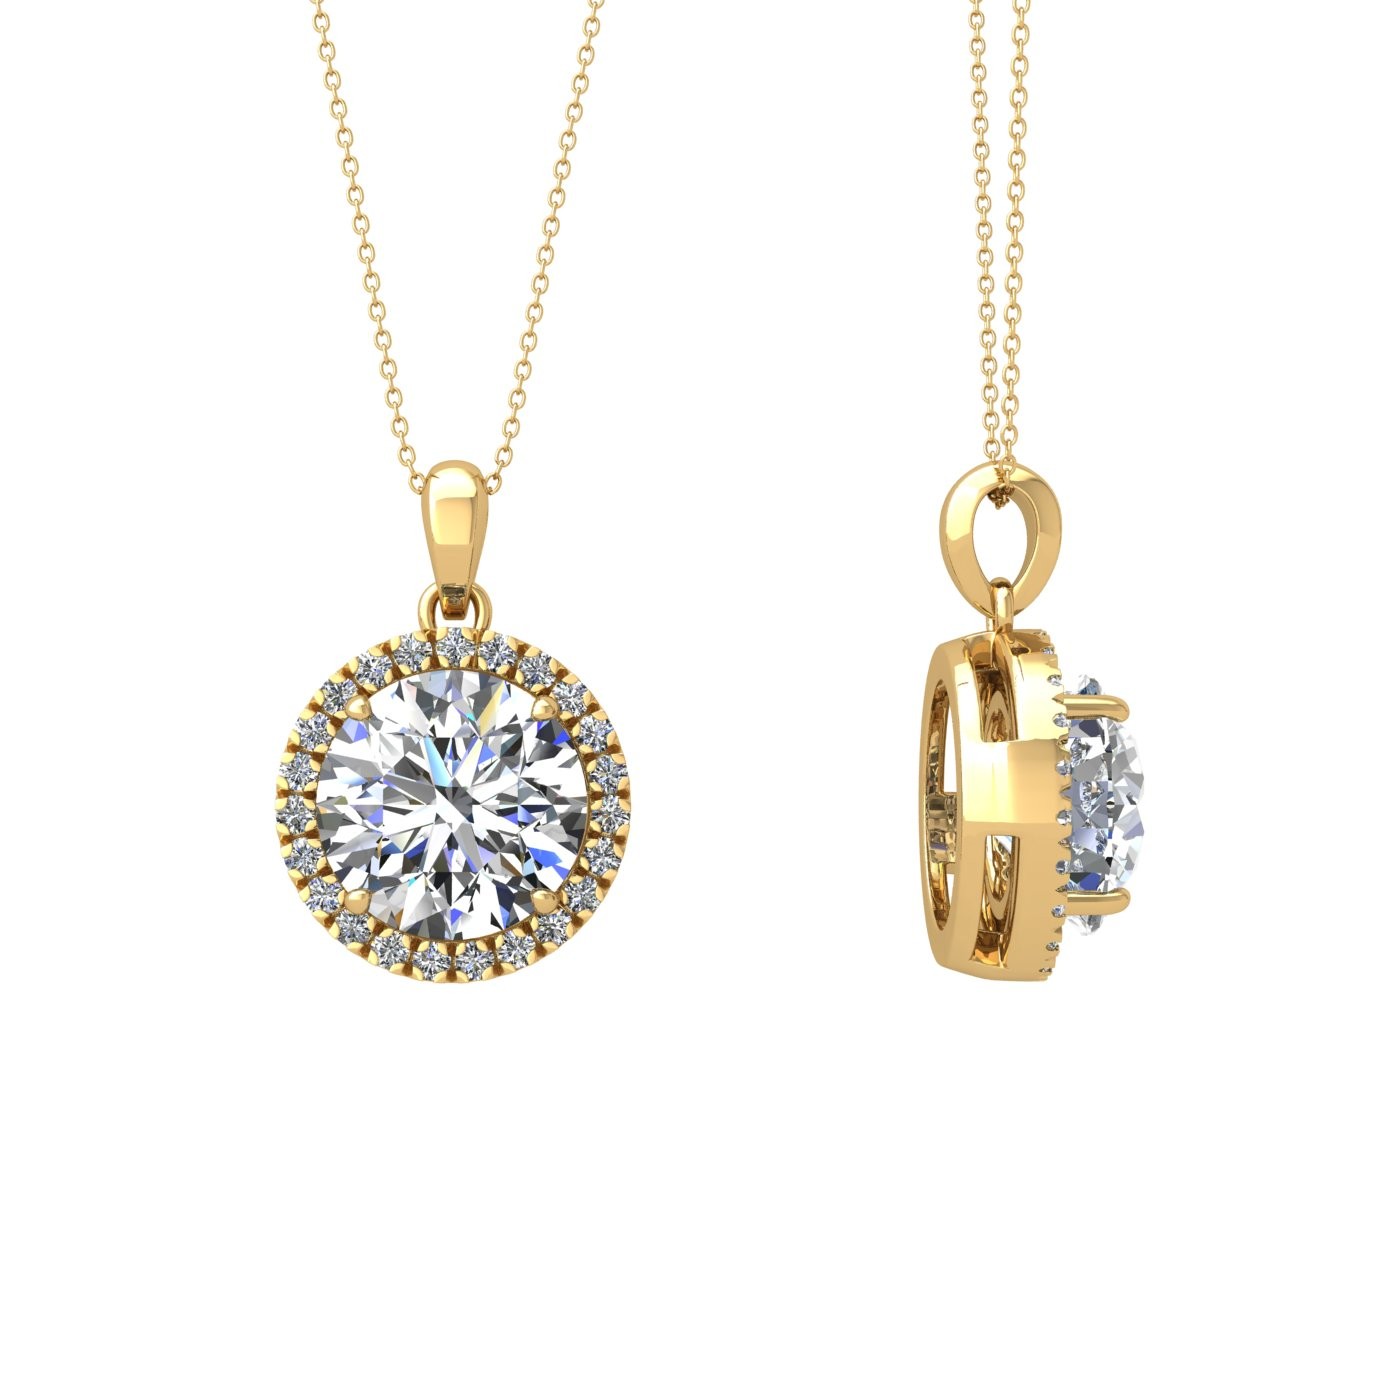 18k yellow gold  0,5 ct 4 prong round shape diamond pendant with diamond pavÉ set halo including chain seperate from the pendant Photos & images